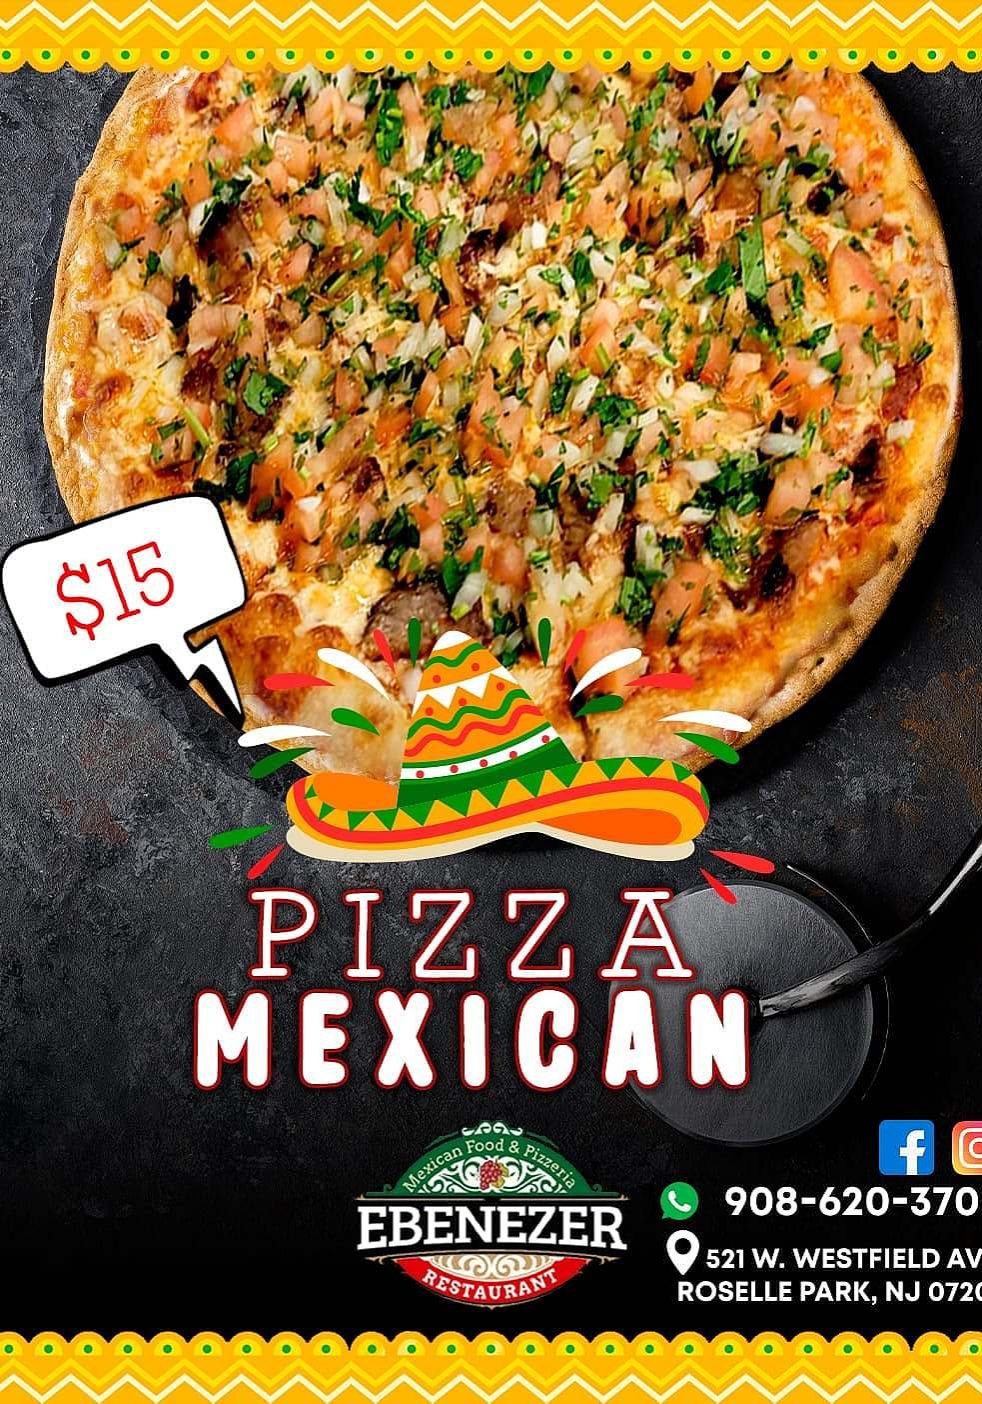 Mexican Pizza Flyer.